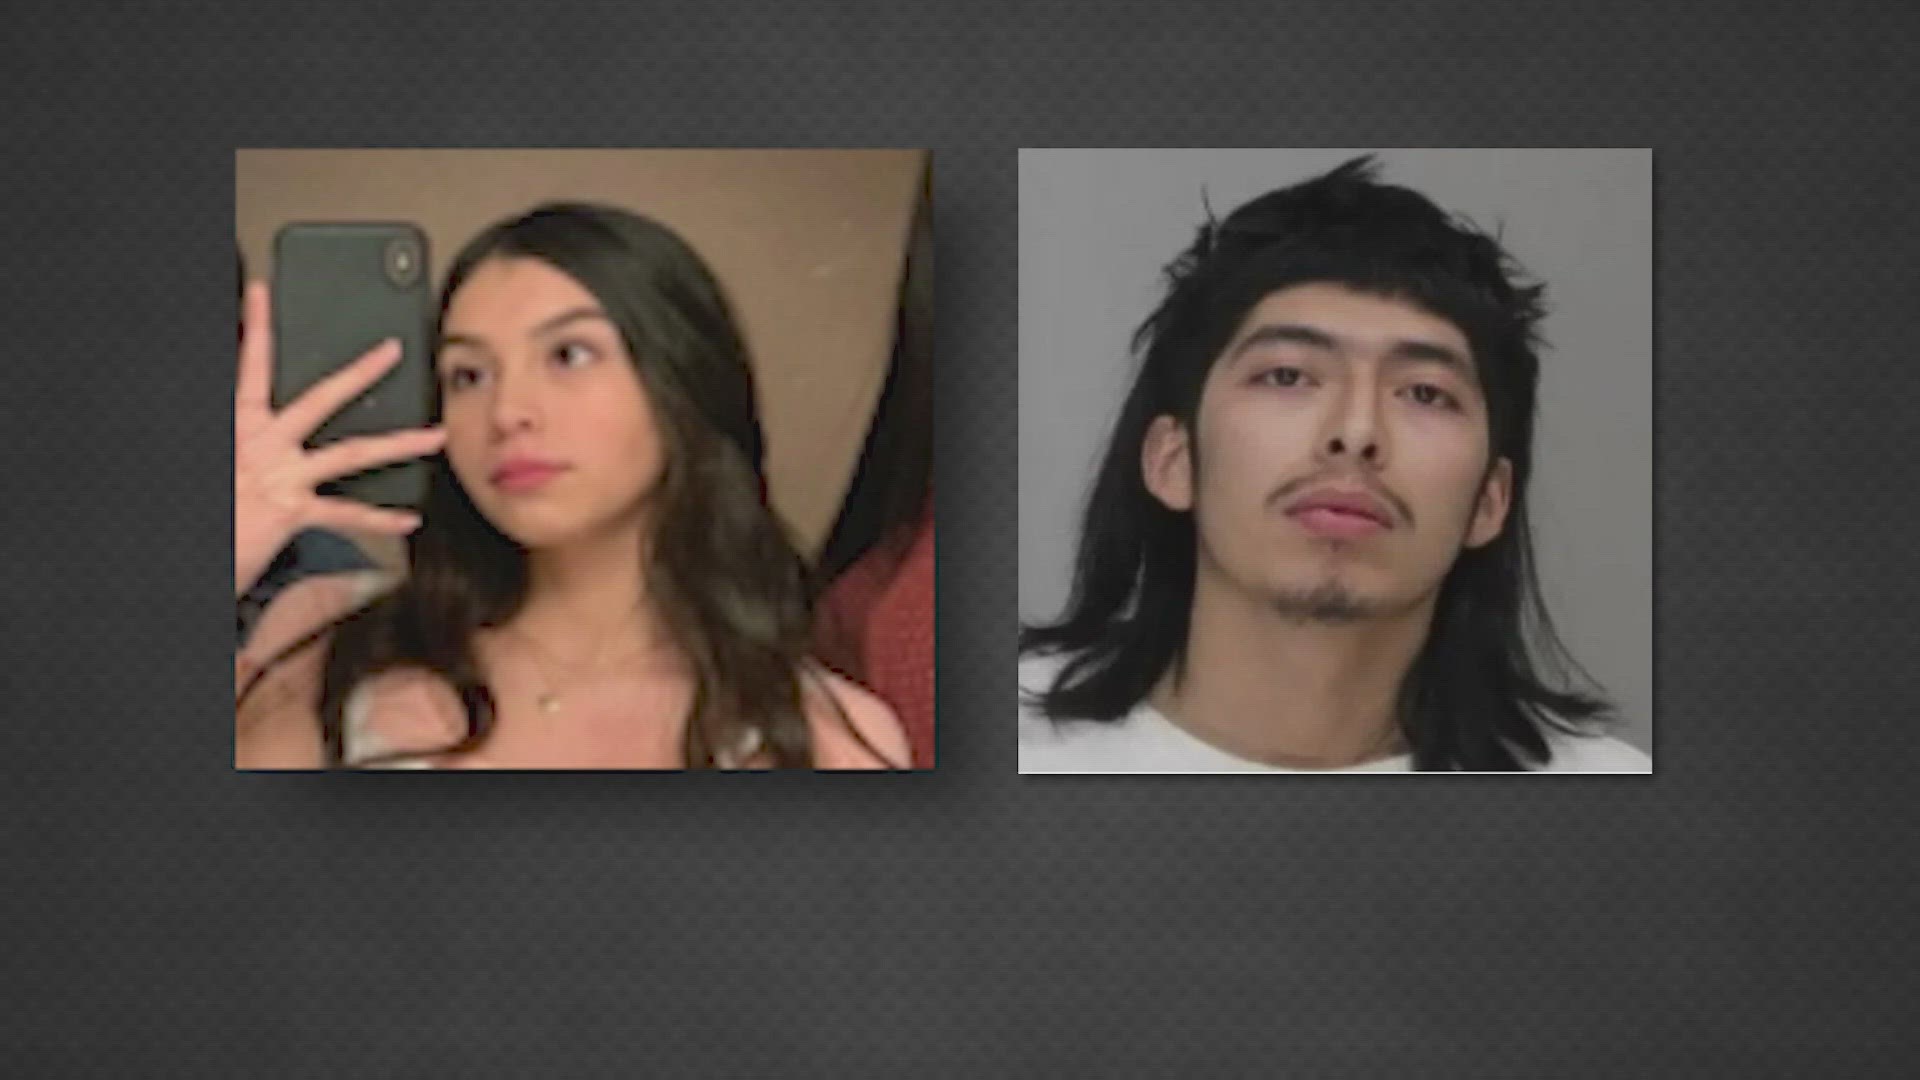 According to Garland police, the reason the victim never made it back home is because the girl and her boyfriend, 21-year-old Yordy Martinez, set him up.